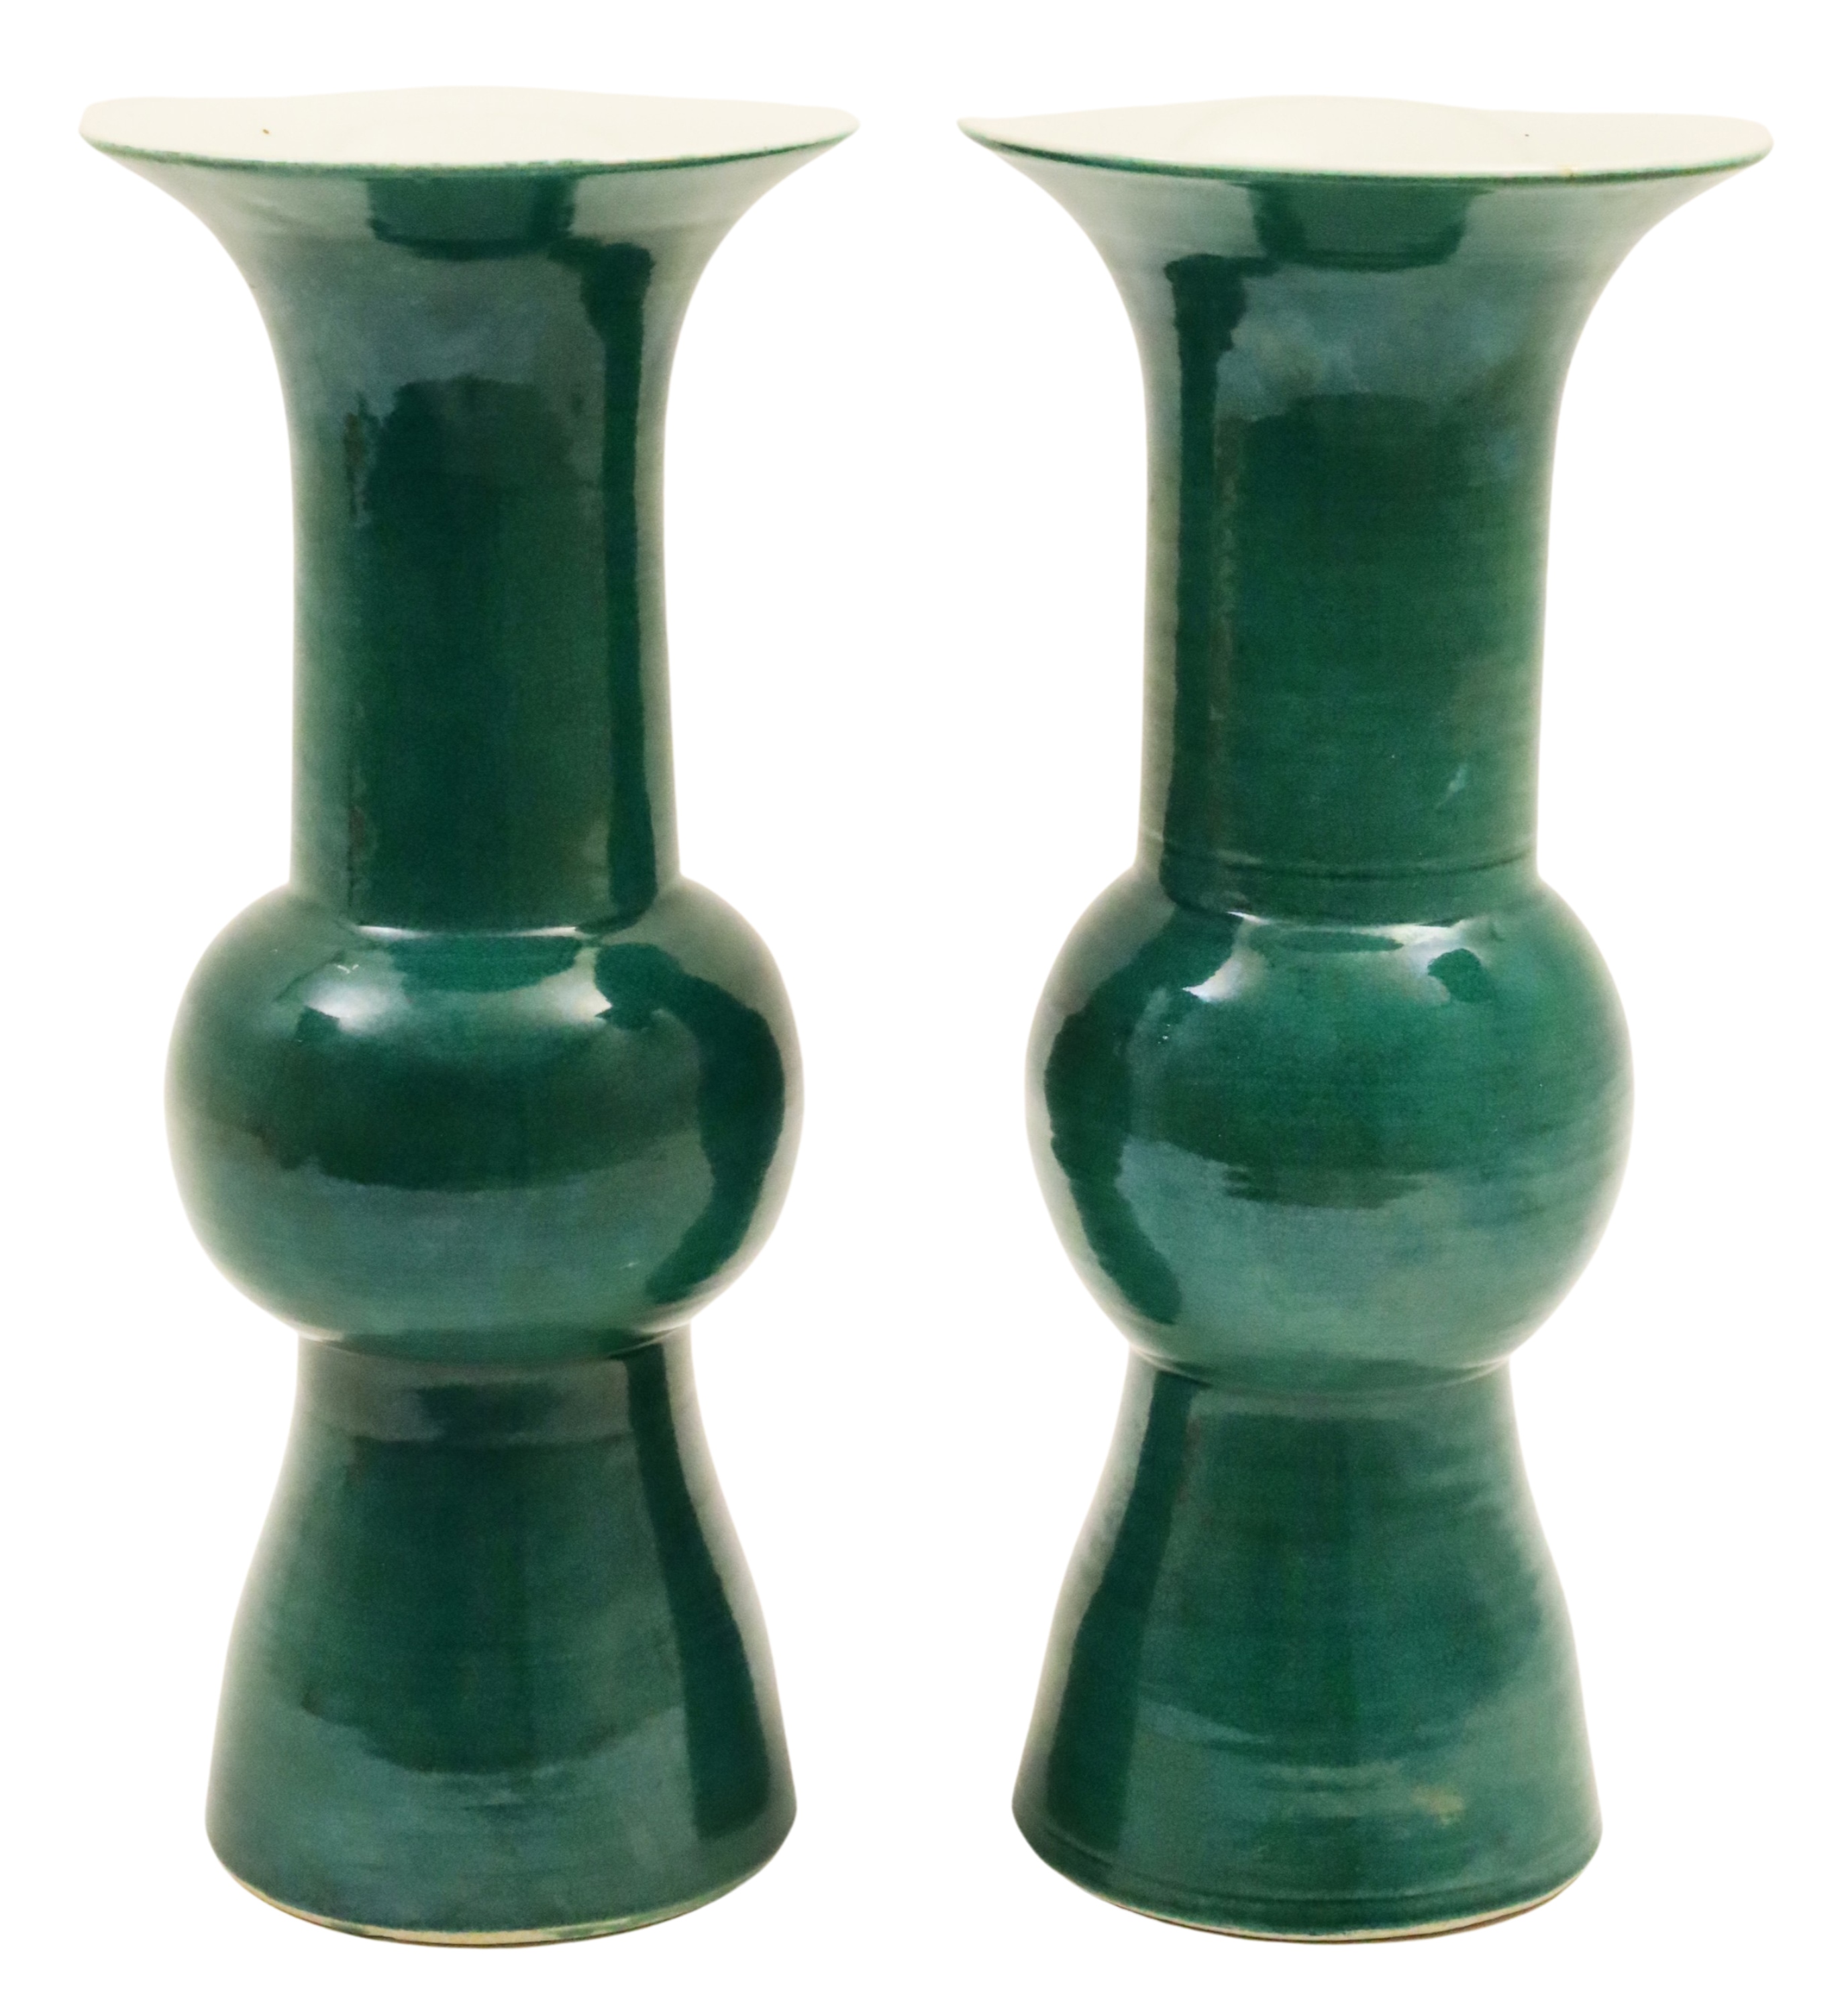 PAIR OF CHINESE EMERALD GLAZED 2f8e41